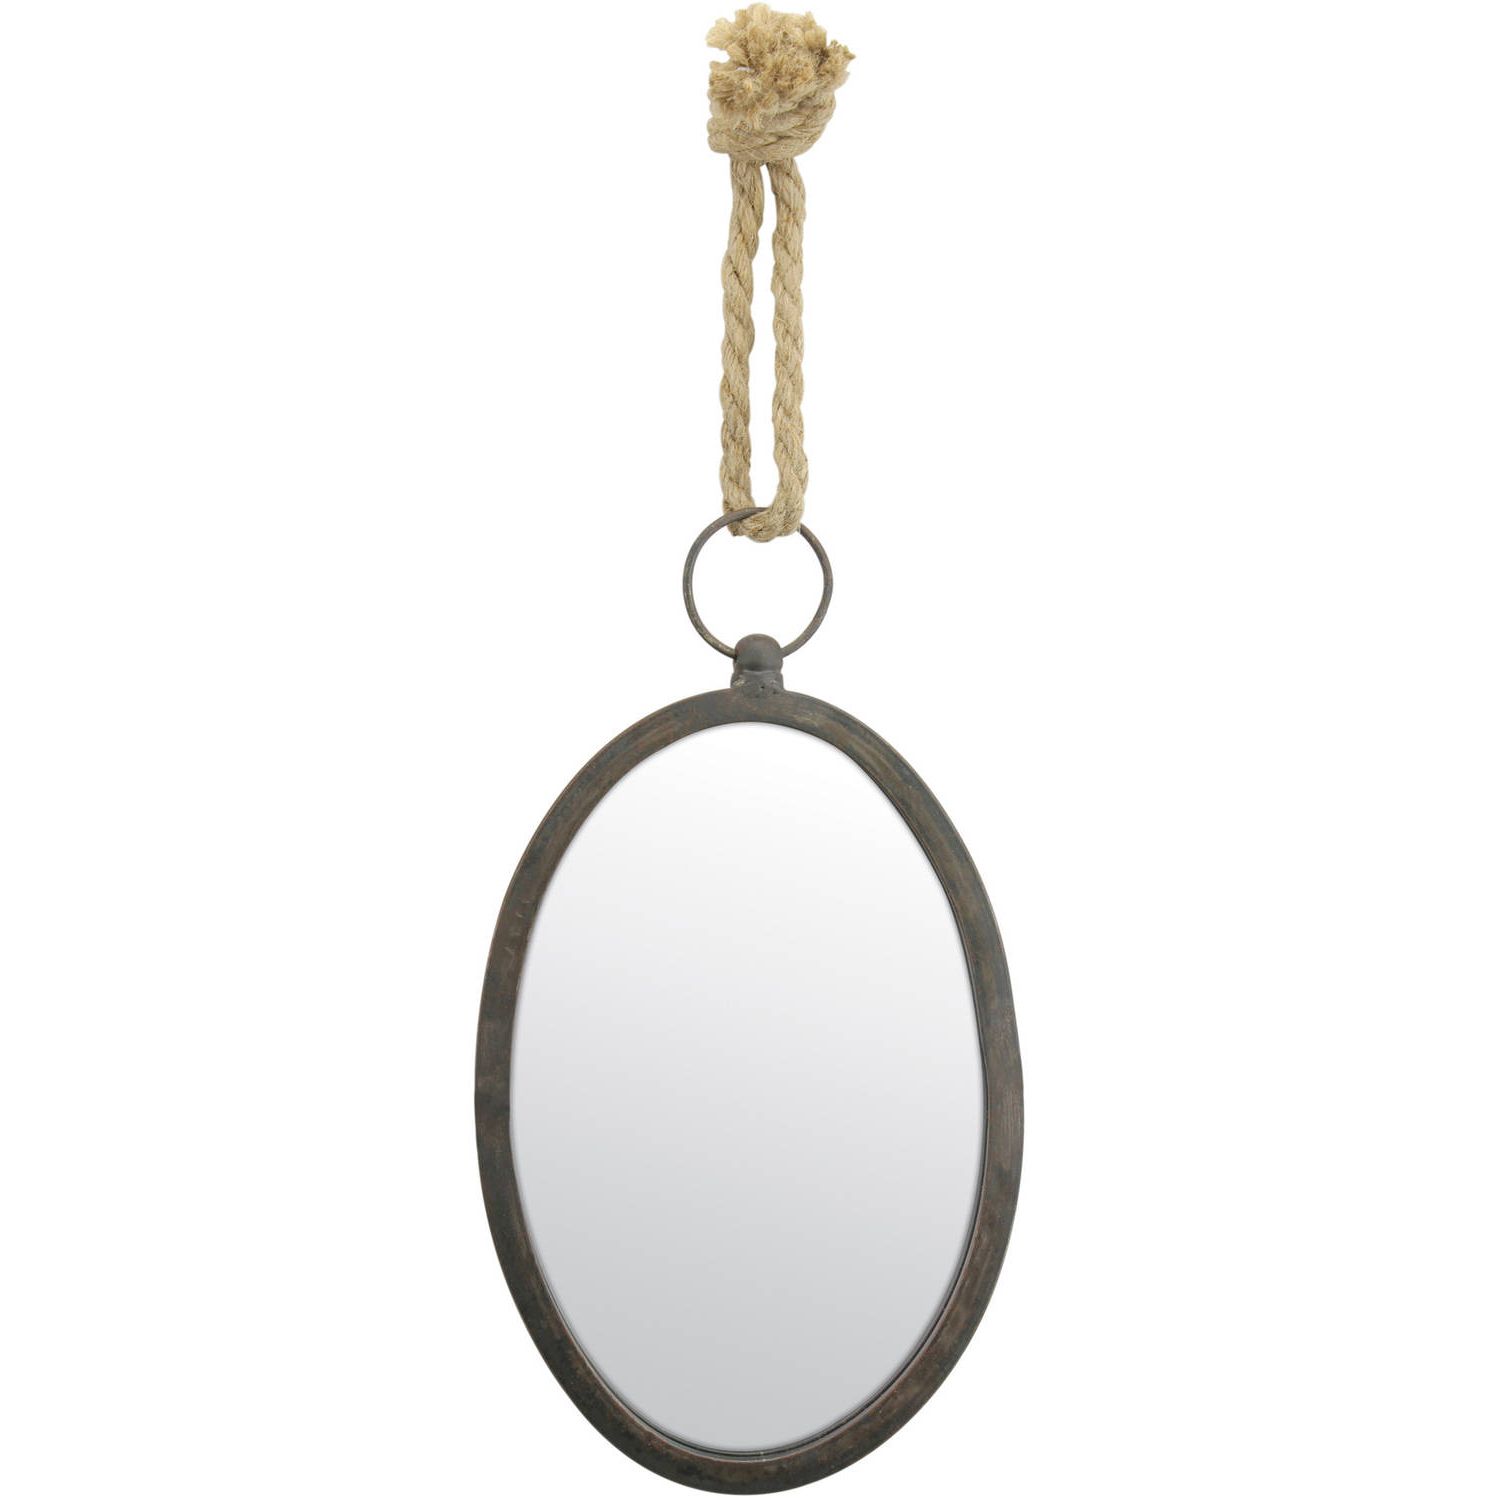 Nautical Wall Mirrors For Most Popular Oval Nautical Wall Mirror (View 8 of 20)